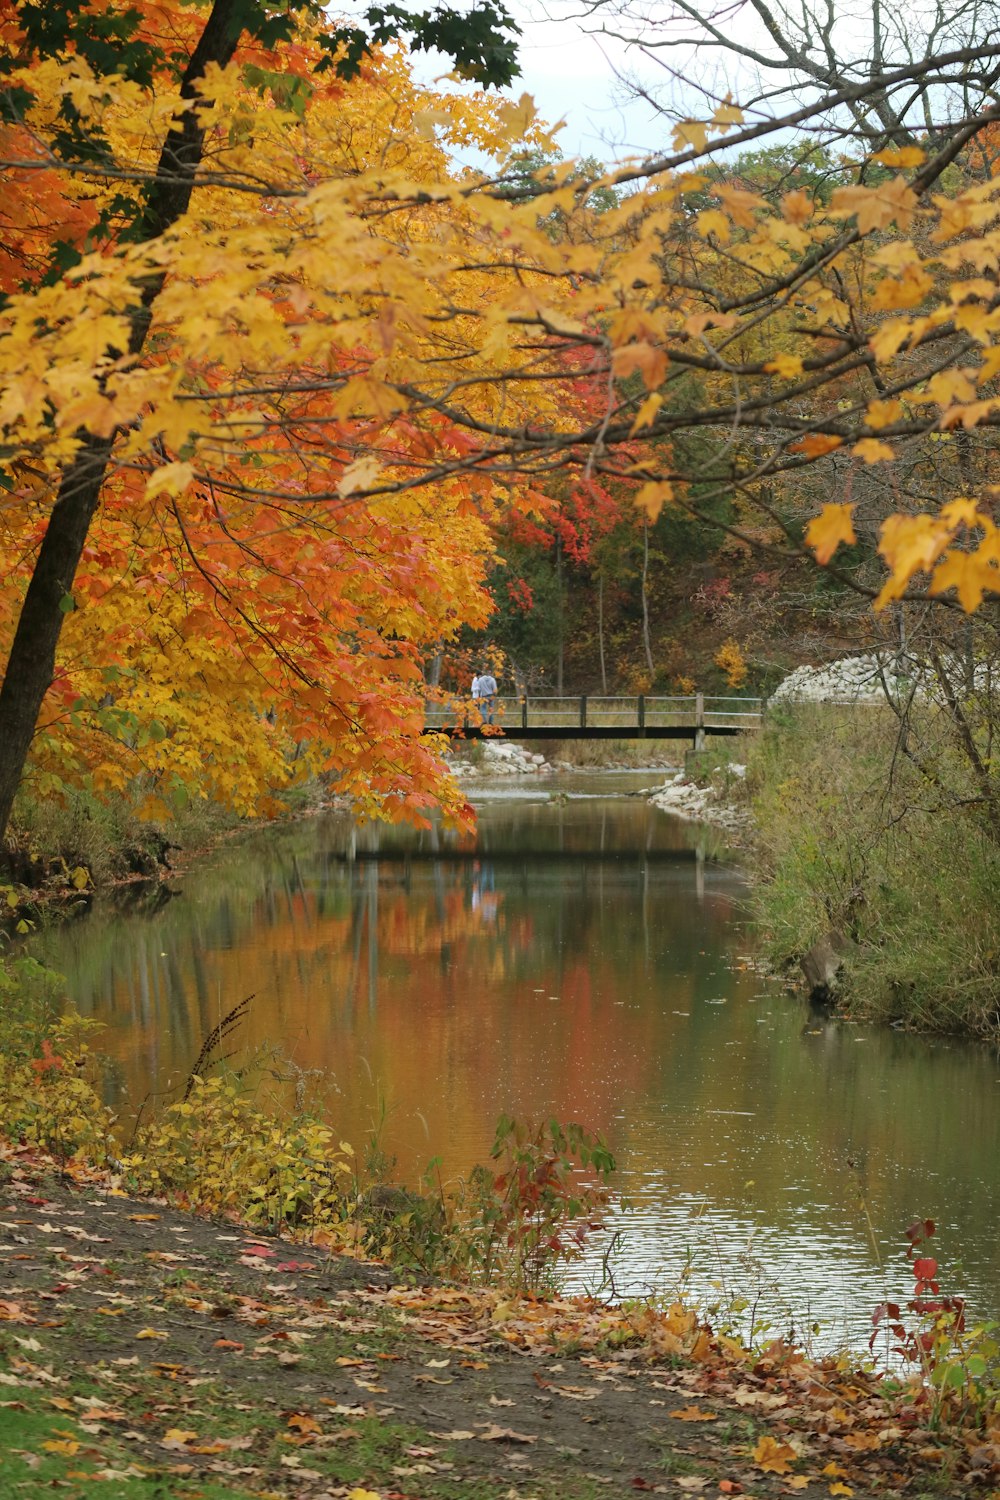 a river surrounded by trees with yellow and red leaves